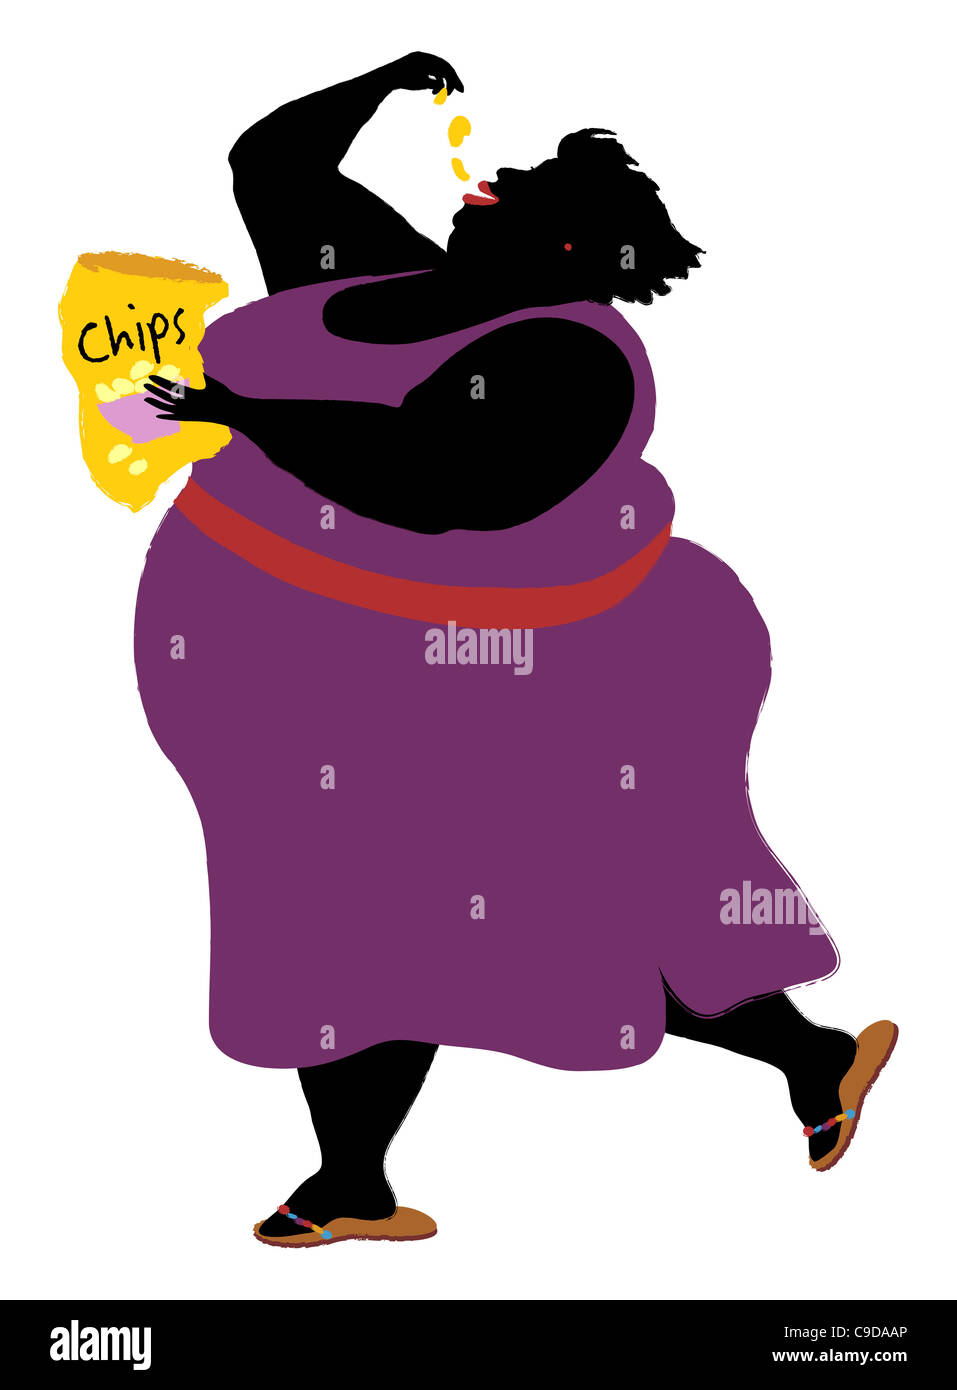 Overweight woman eating chips, illustration Stock Photo